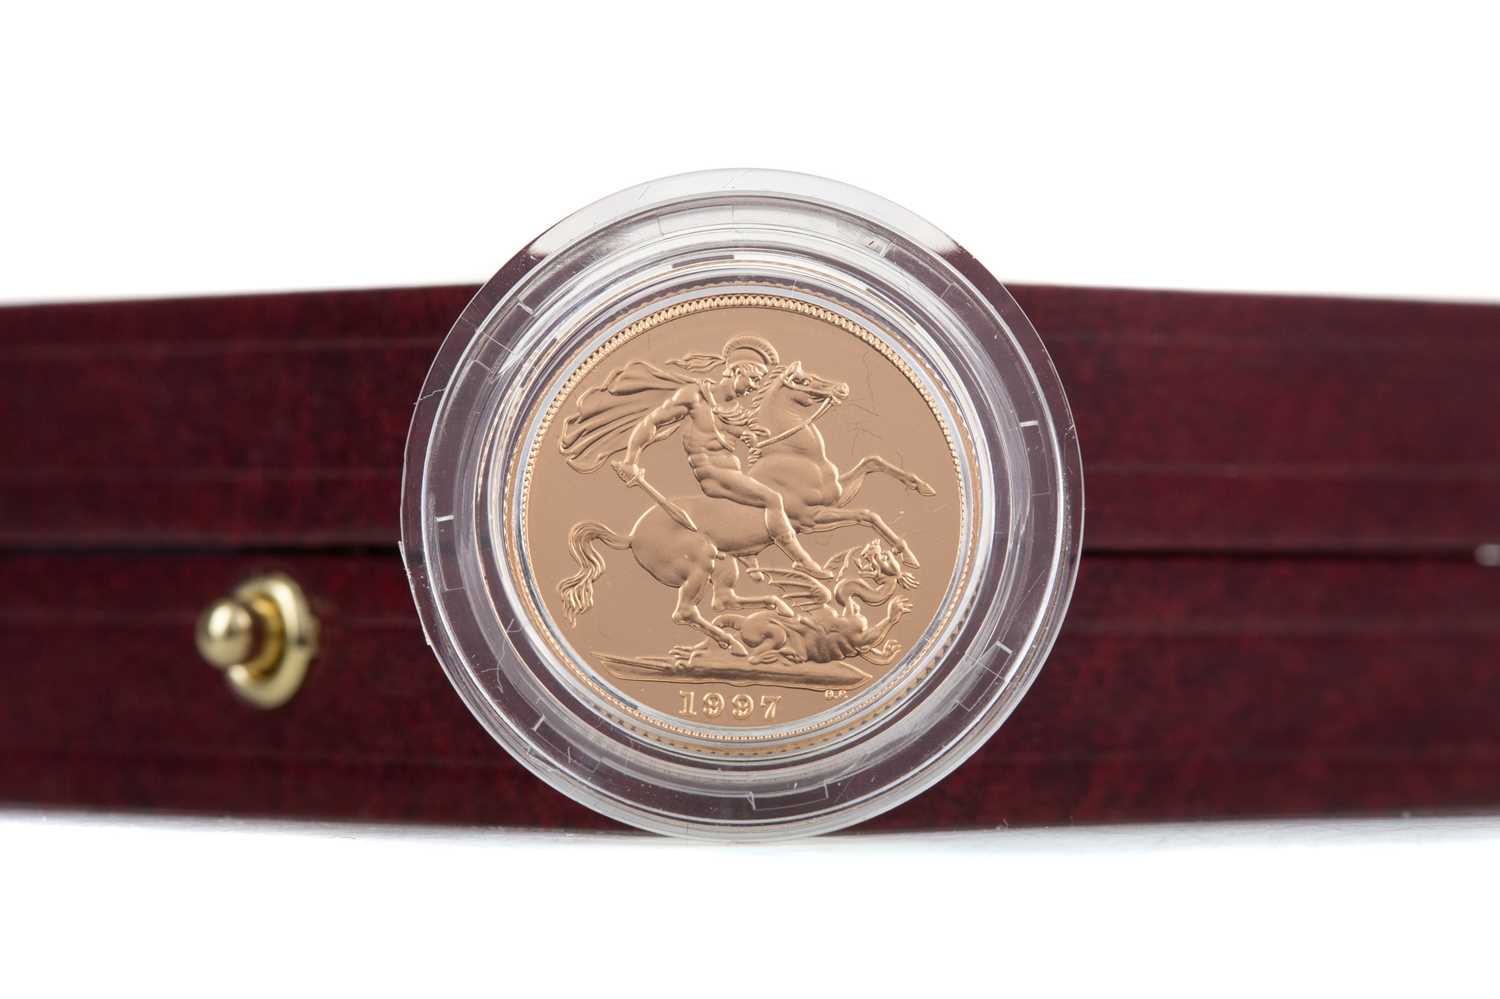 Lot 63 - AN ELIZABETH II GOLD PROOF SOVEREIGN DATED 1997